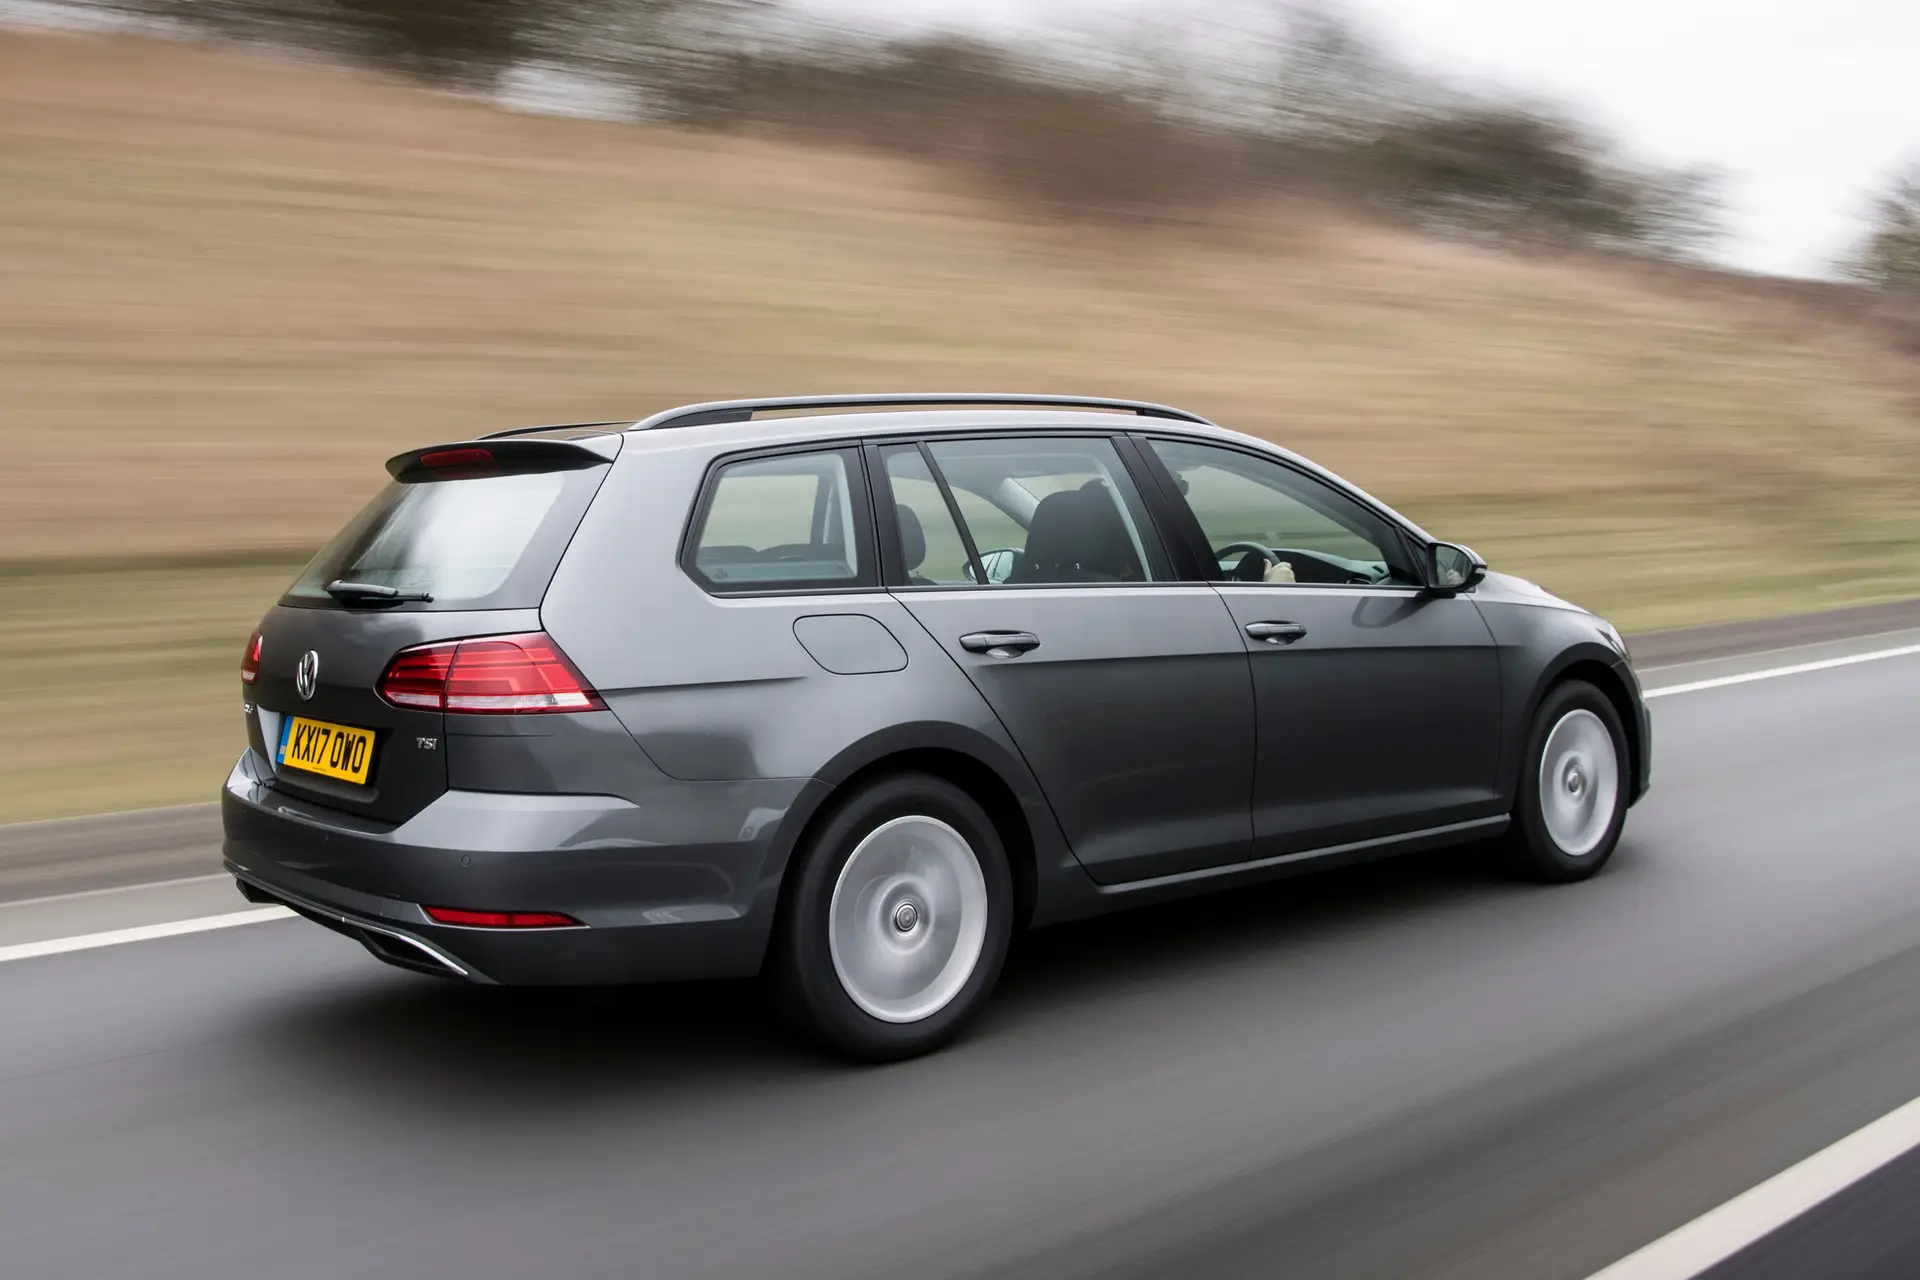 Volkswagen Golf Estate (2015-2020) Review: Exterior rear three quarter photo of the Volkswagen Golf Estate on the road